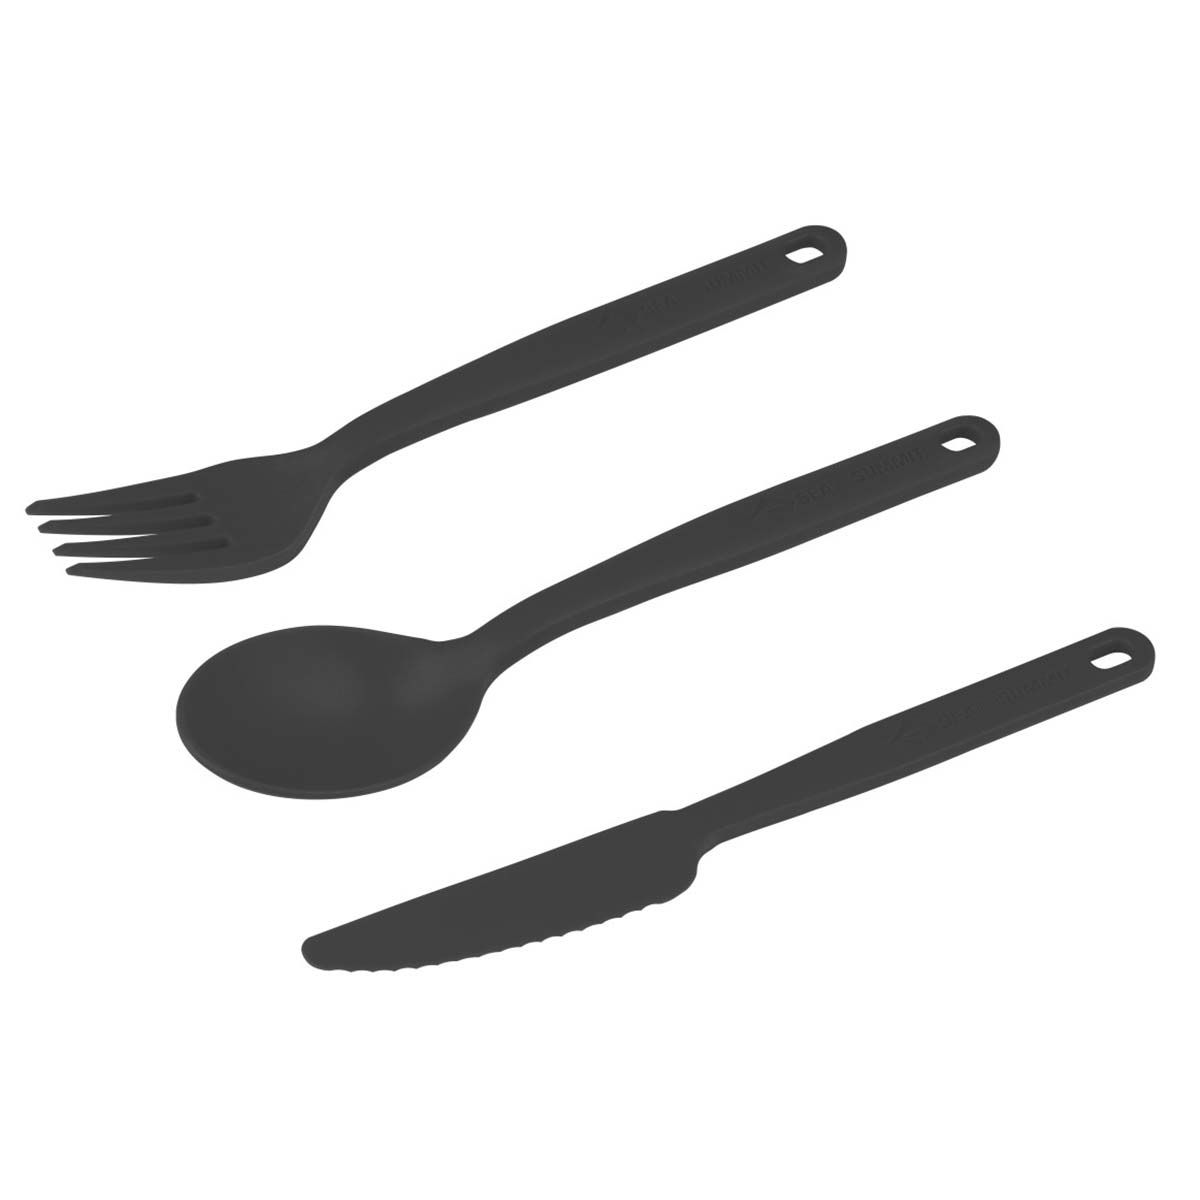 Sea to Summit Camp Cutlery charcoal